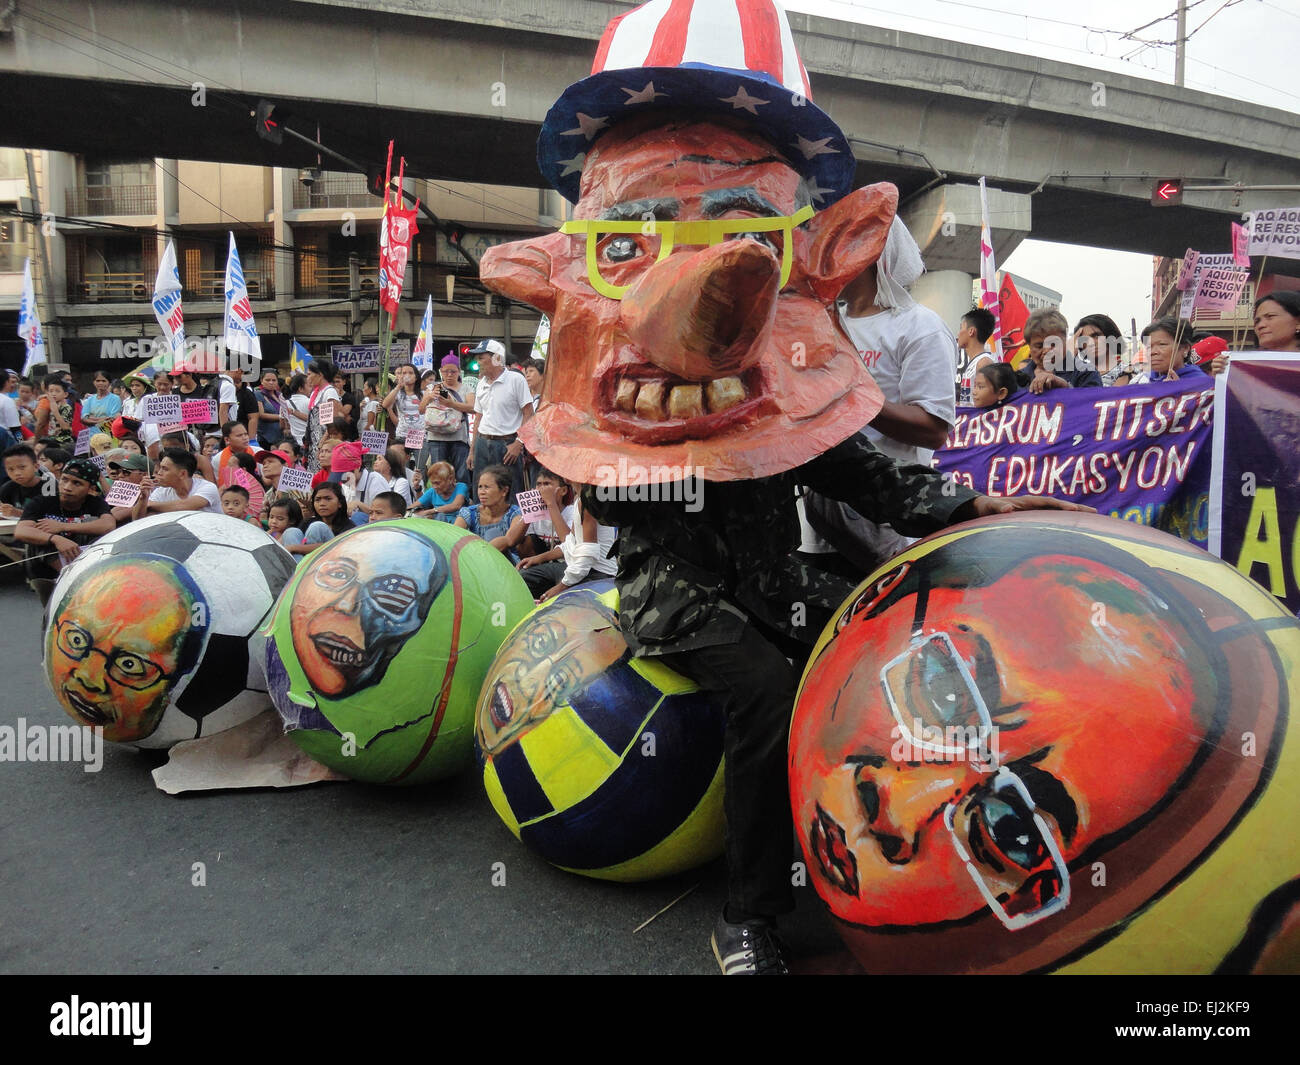 Manila, Philippines. 20th Mar, 2015. A Filipino activist wearing a mask depicting Philippine President Benigno Aquino III as 'Pinocchio' donning a US-styled top hat looks on alongside balls containing the faces of the Philippine president, during a rally at Mendiola. President Aquino is facing calls for his removal over the botched anti-terror operation last January 25 in Mamasapano, Maguindanao to hunt wanted Malaysian bombmaker Zulkifri bin Hir, alias Marwan, that resulted in the deaths of 44 police commandos. Credit:  Richard James Mendoza/Pacific Press/Alamy Live News Stock Photo